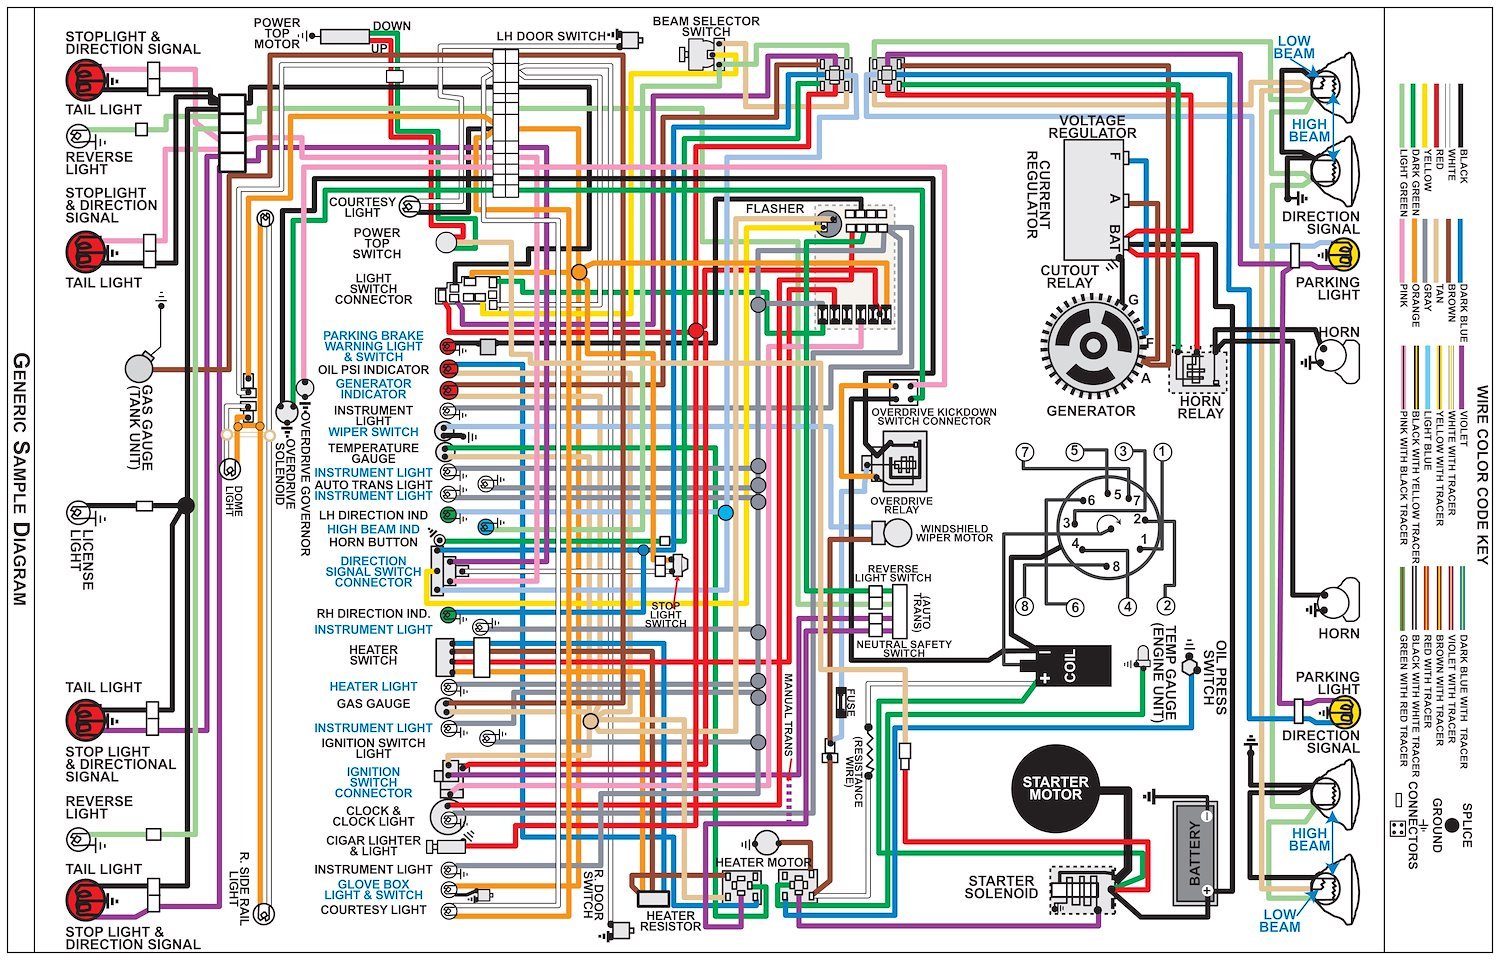 Wiring Diagram for 1968 Chevy Camaro (All Models), 11 in. x 17 in., Laminated